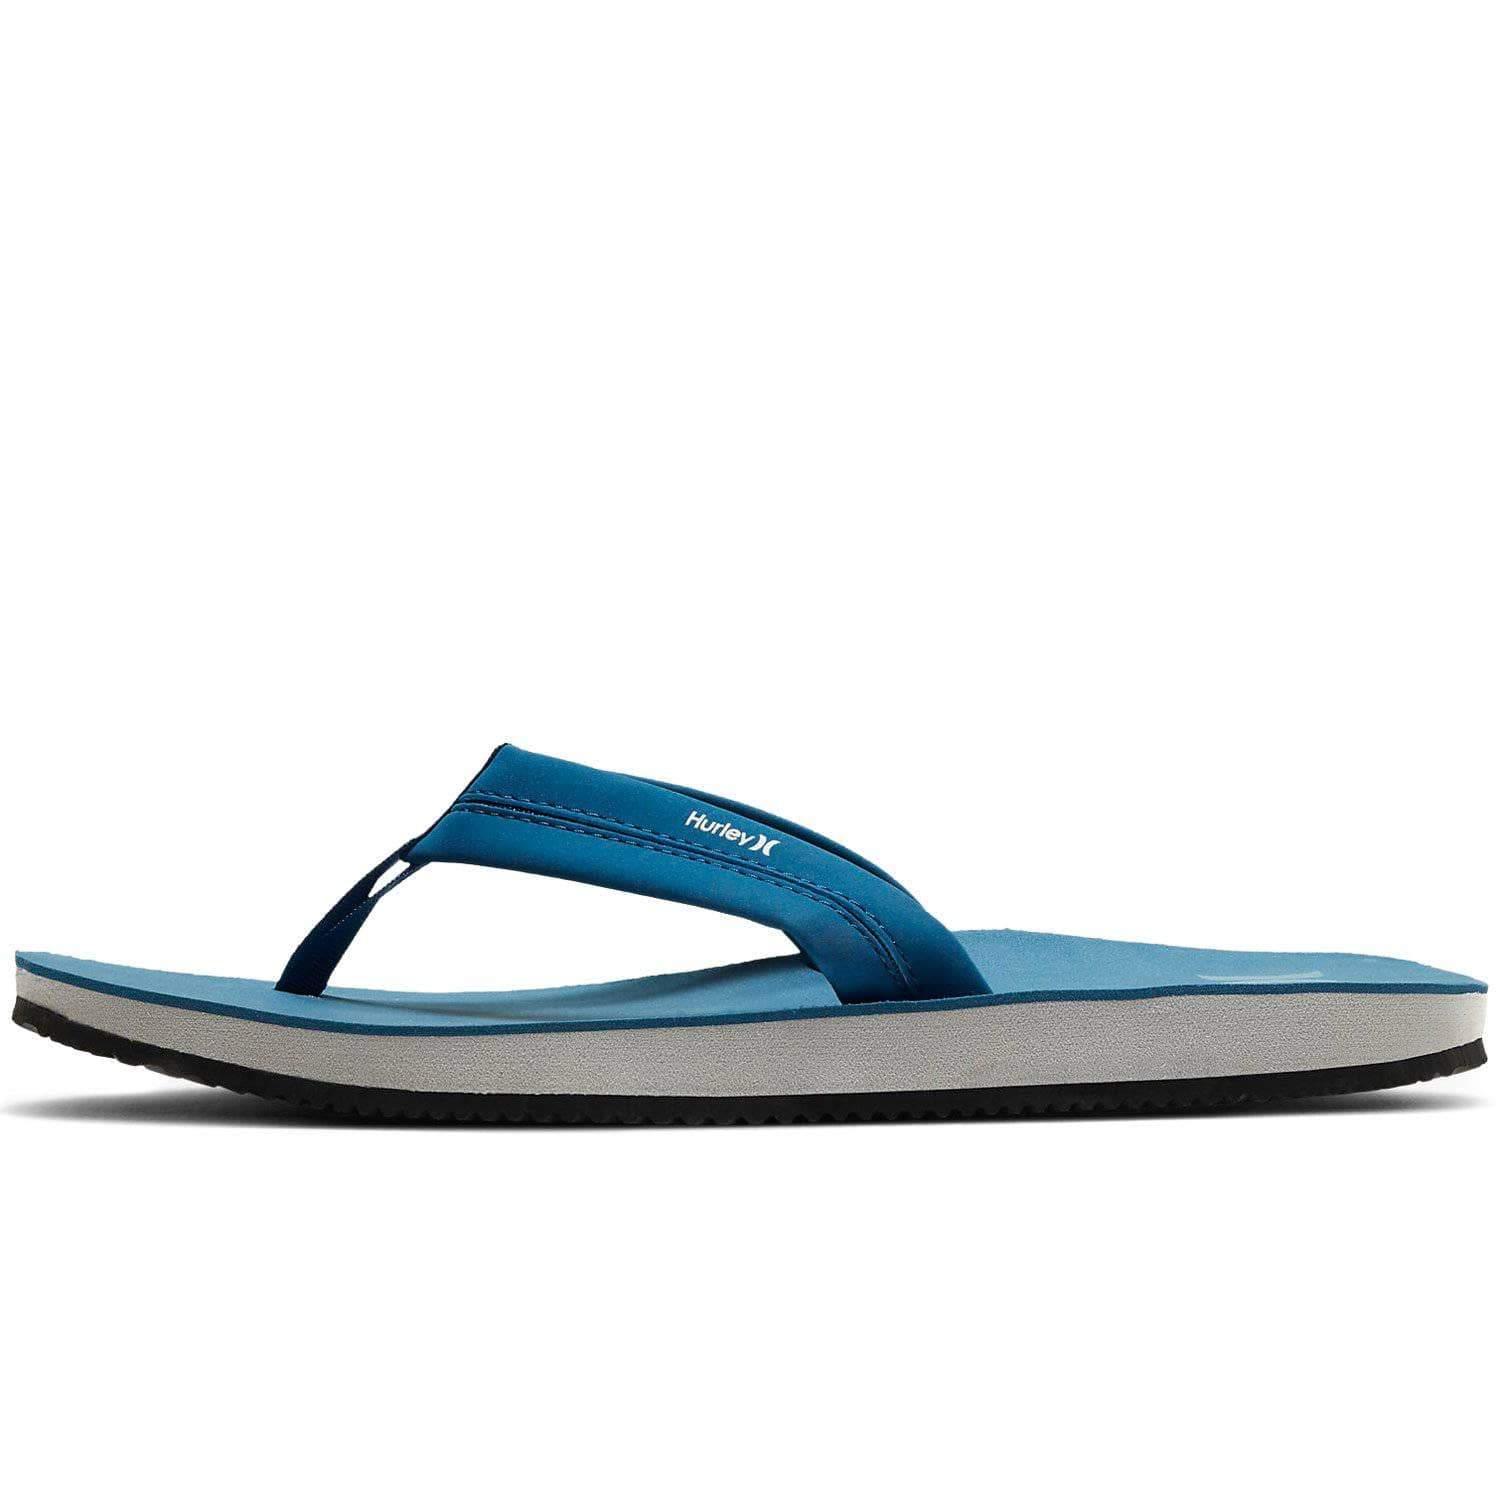 Hurley Lunar Blue | Free UK Delivery Available - Yakwax